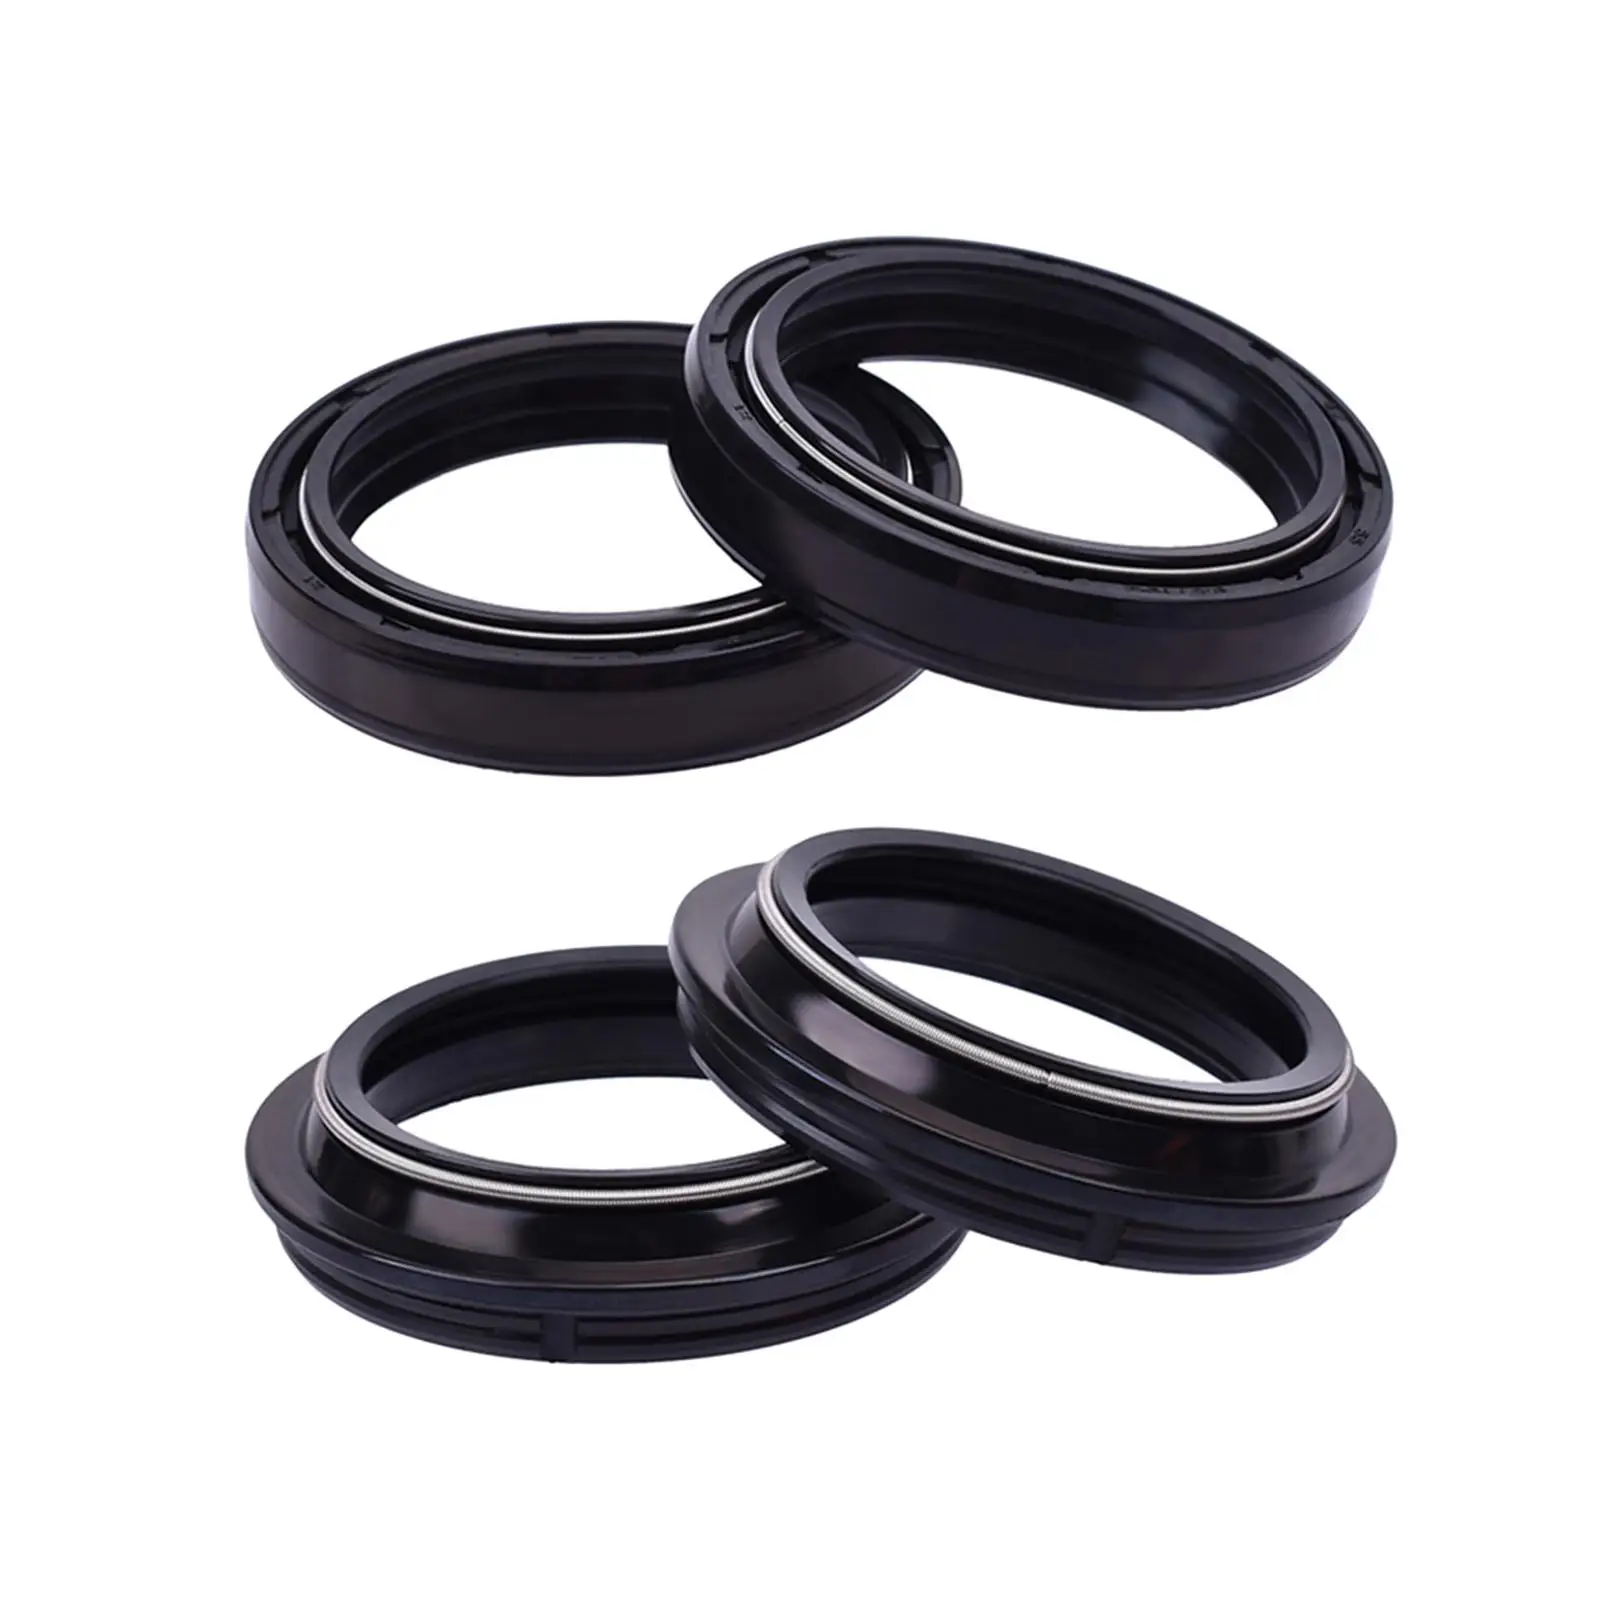 Fork and Dust Seal Kit Accessories for Suzuki RM125 Rm-z450 Dr-z400SM